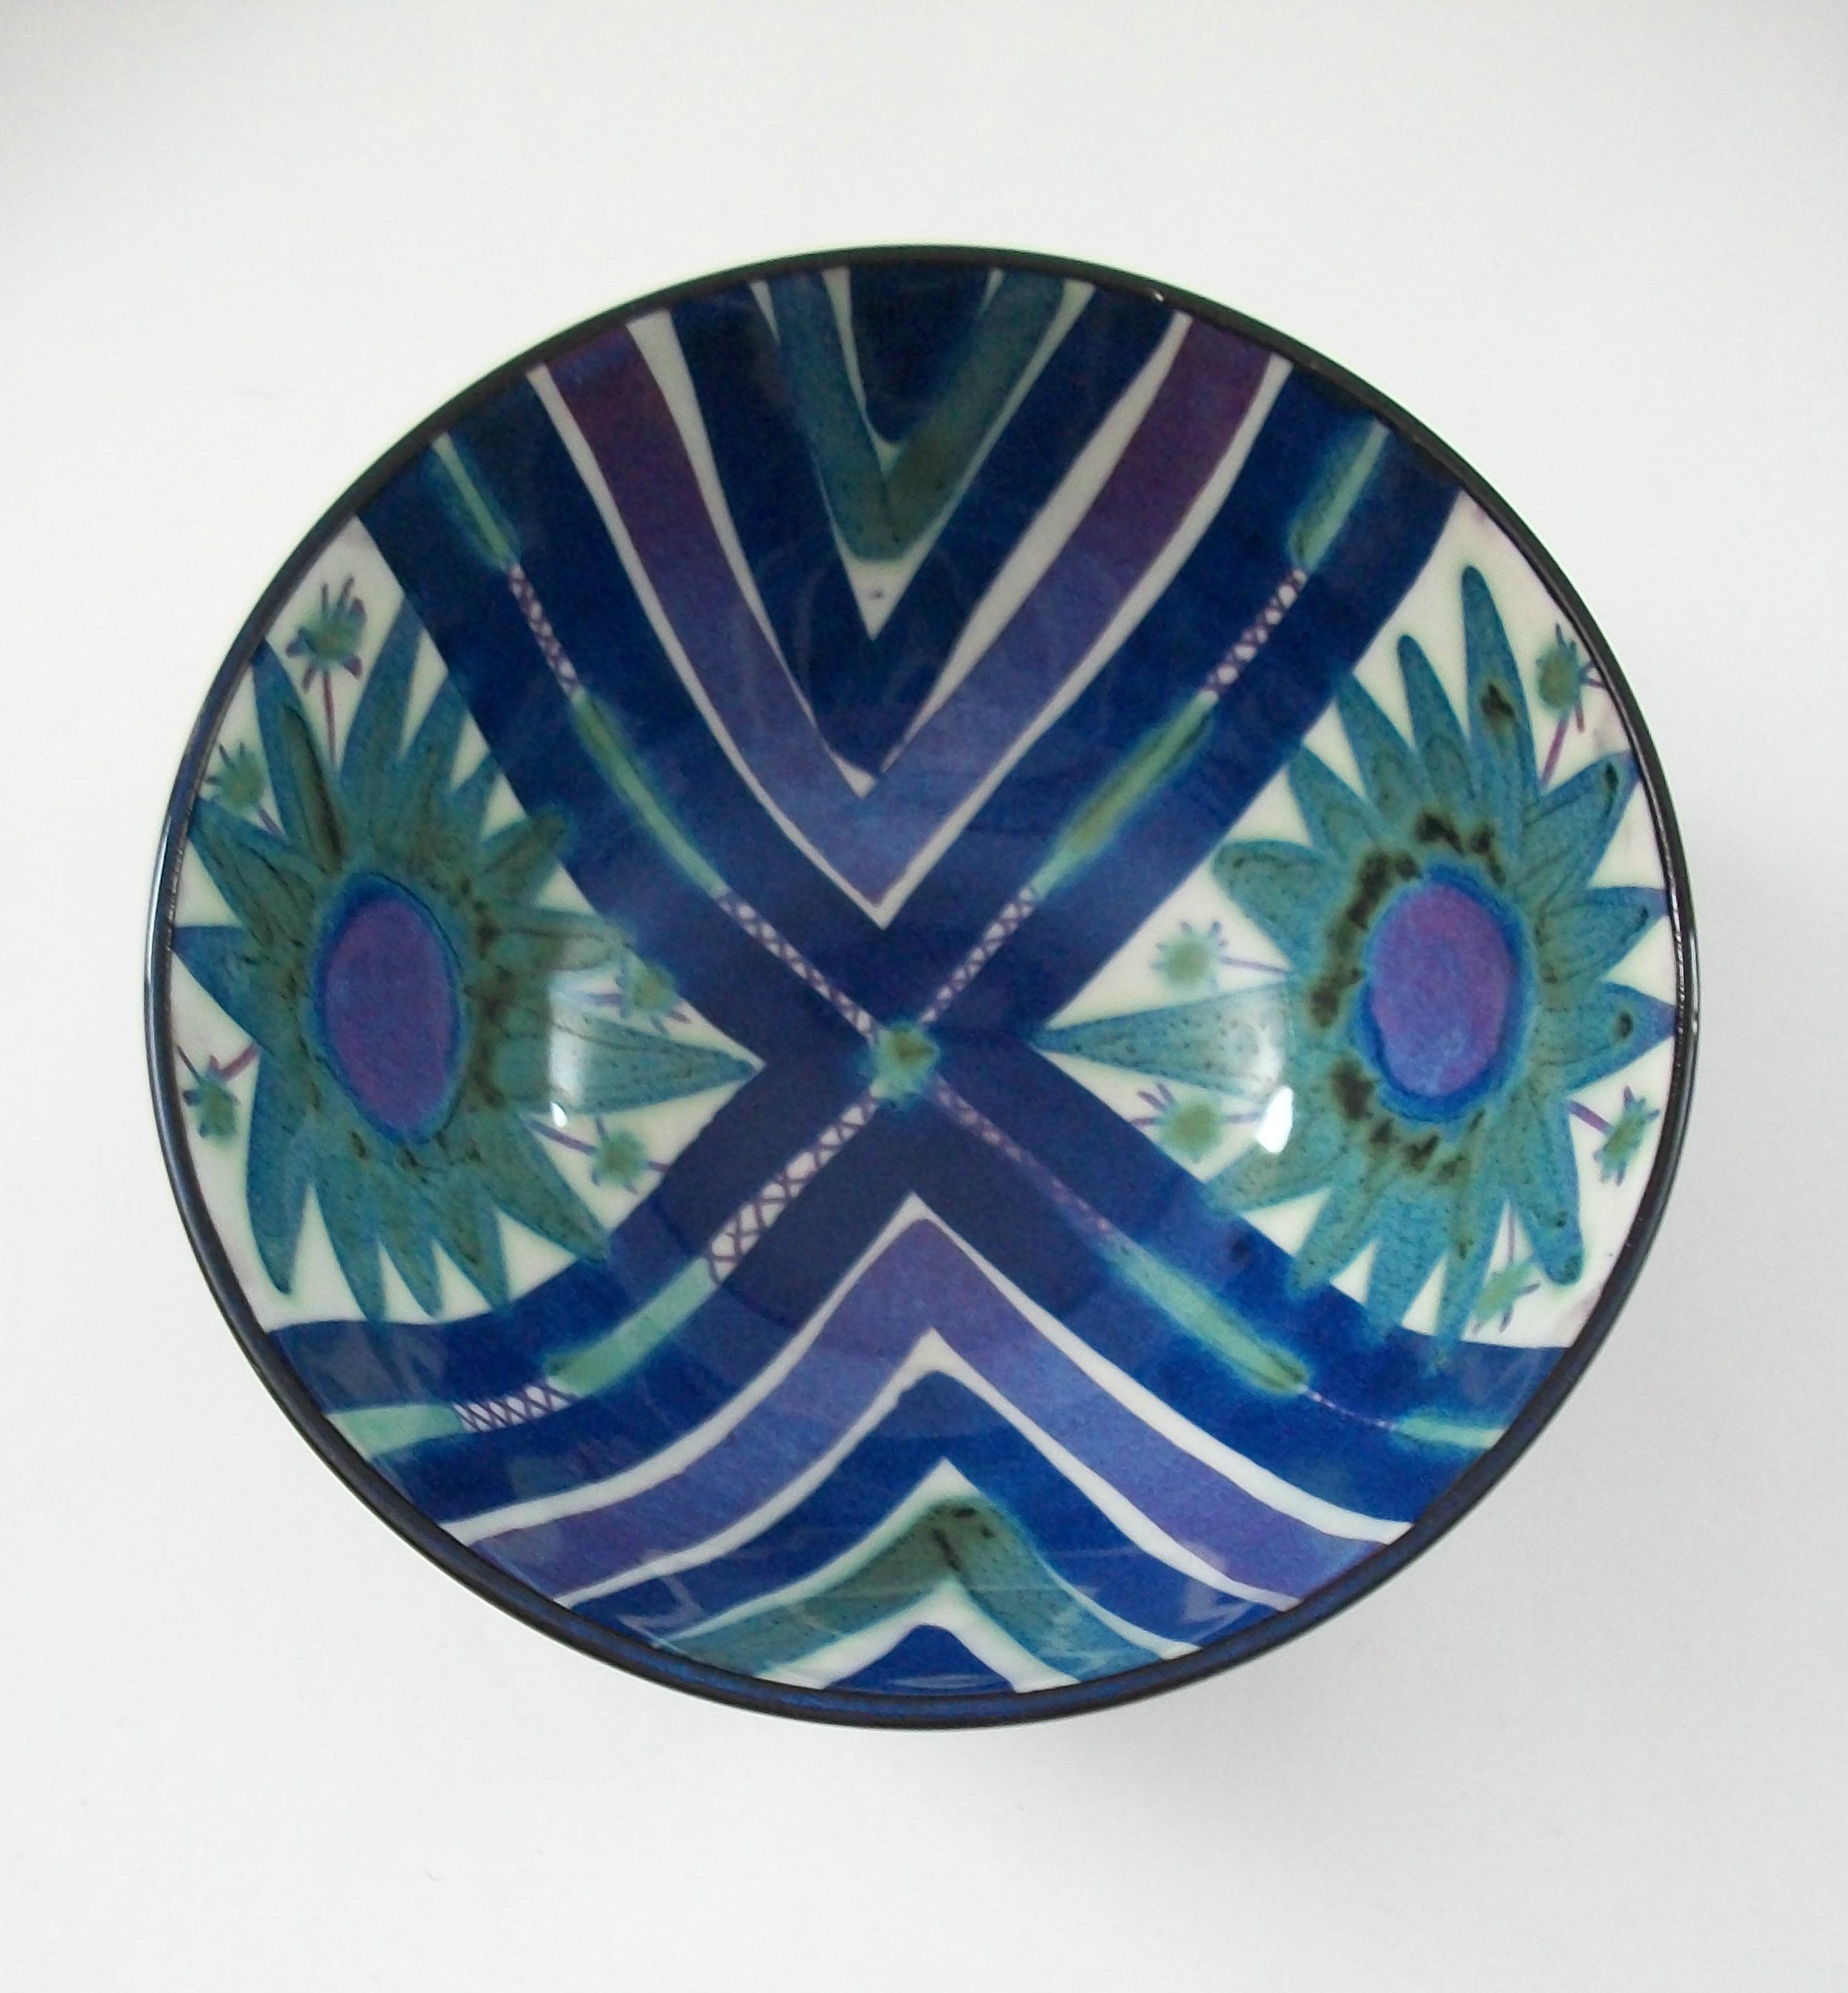 ROYAL COPENHAGEN (Manufacturer) - MARIANNE JOHNSON (Designer) - Mid Century fajance bowl - featuring a hand painted floral and chevron pattern to the interior of the bowl - hand painted blue exterior - signed on the base - Denmark - circa